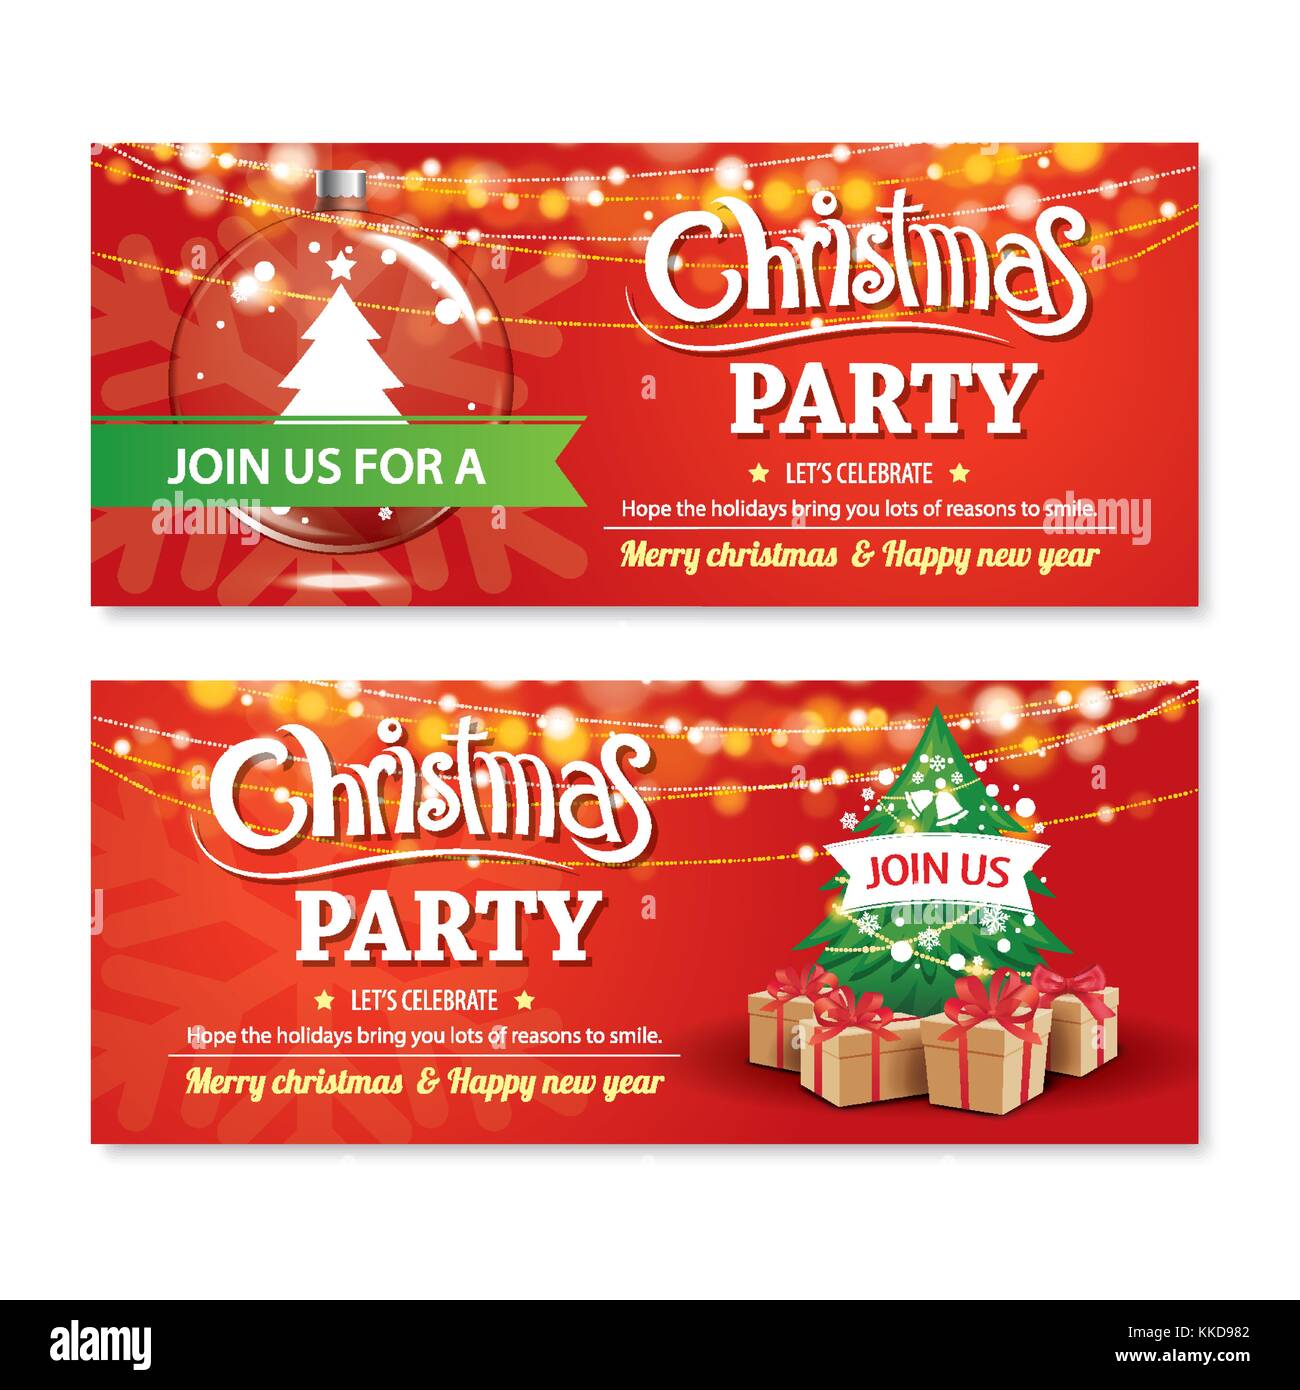 Merry Christmas and Happy New Year Banners Christmas Party Decoration 